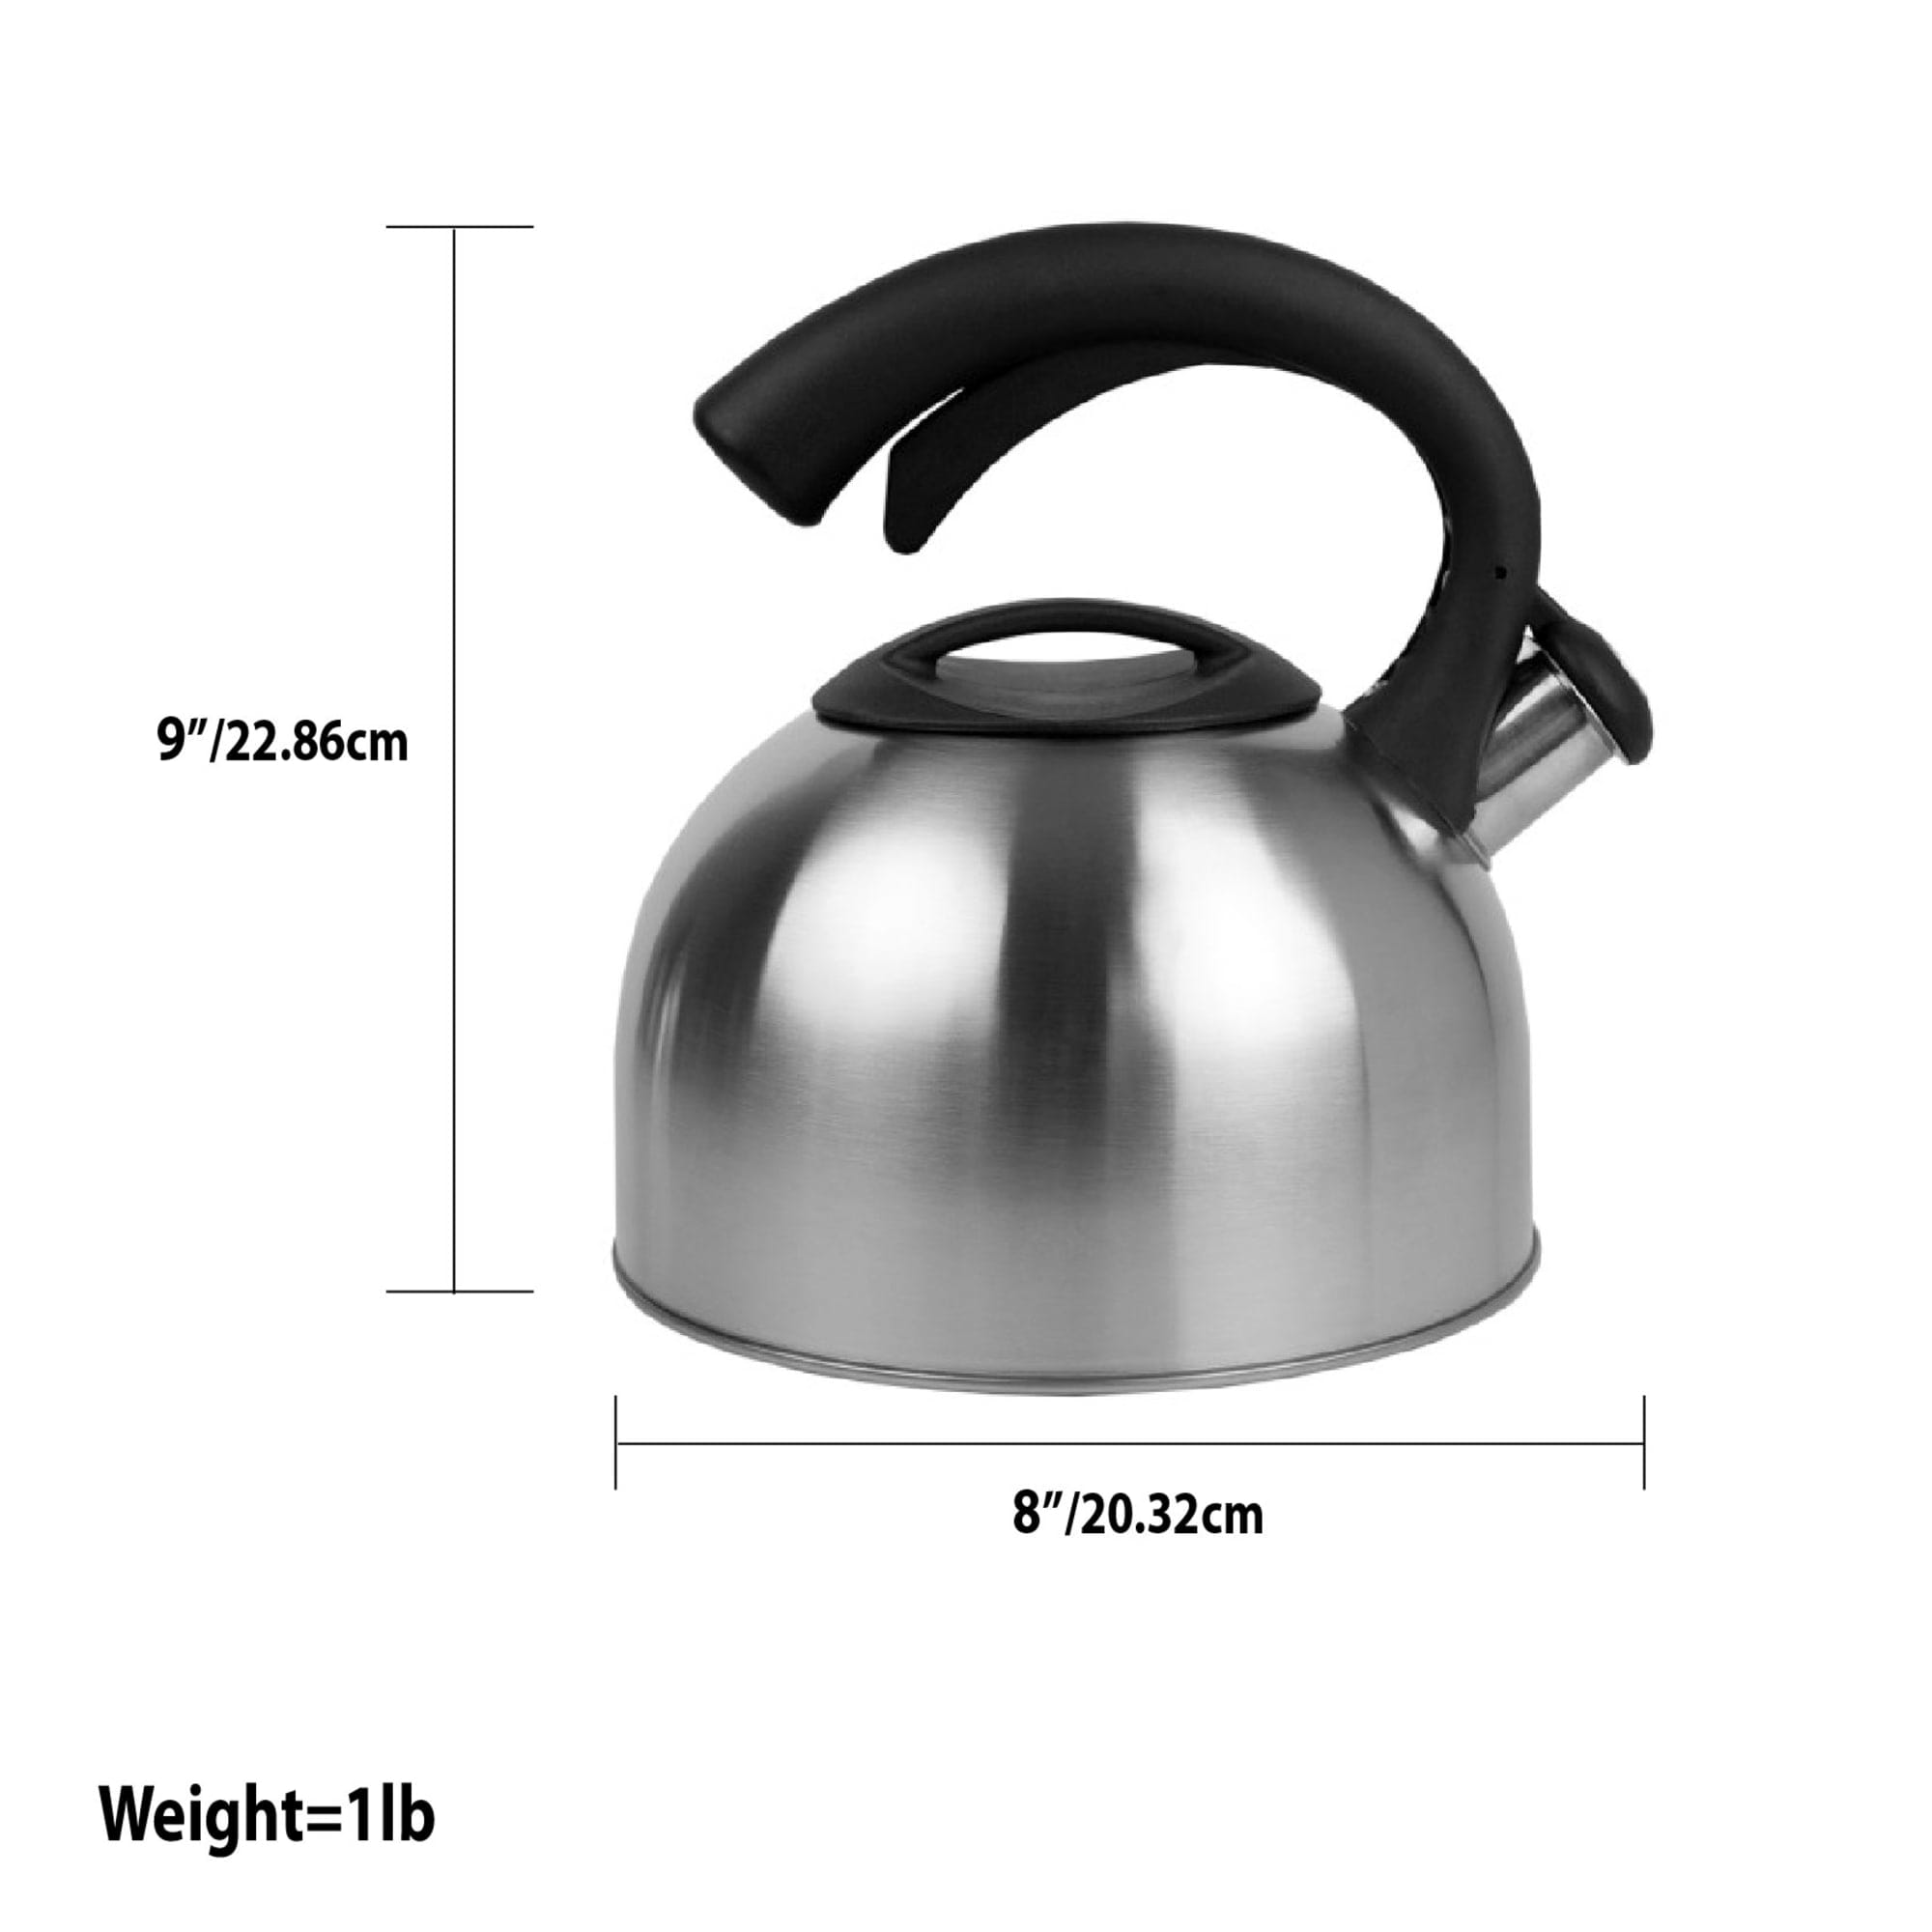 Home Basics 2.5 Liter Easy Pour Whistling Brushed Stainless Steel Tea Kettle, Silver $10.00 EACH, CASE PACK OF 6